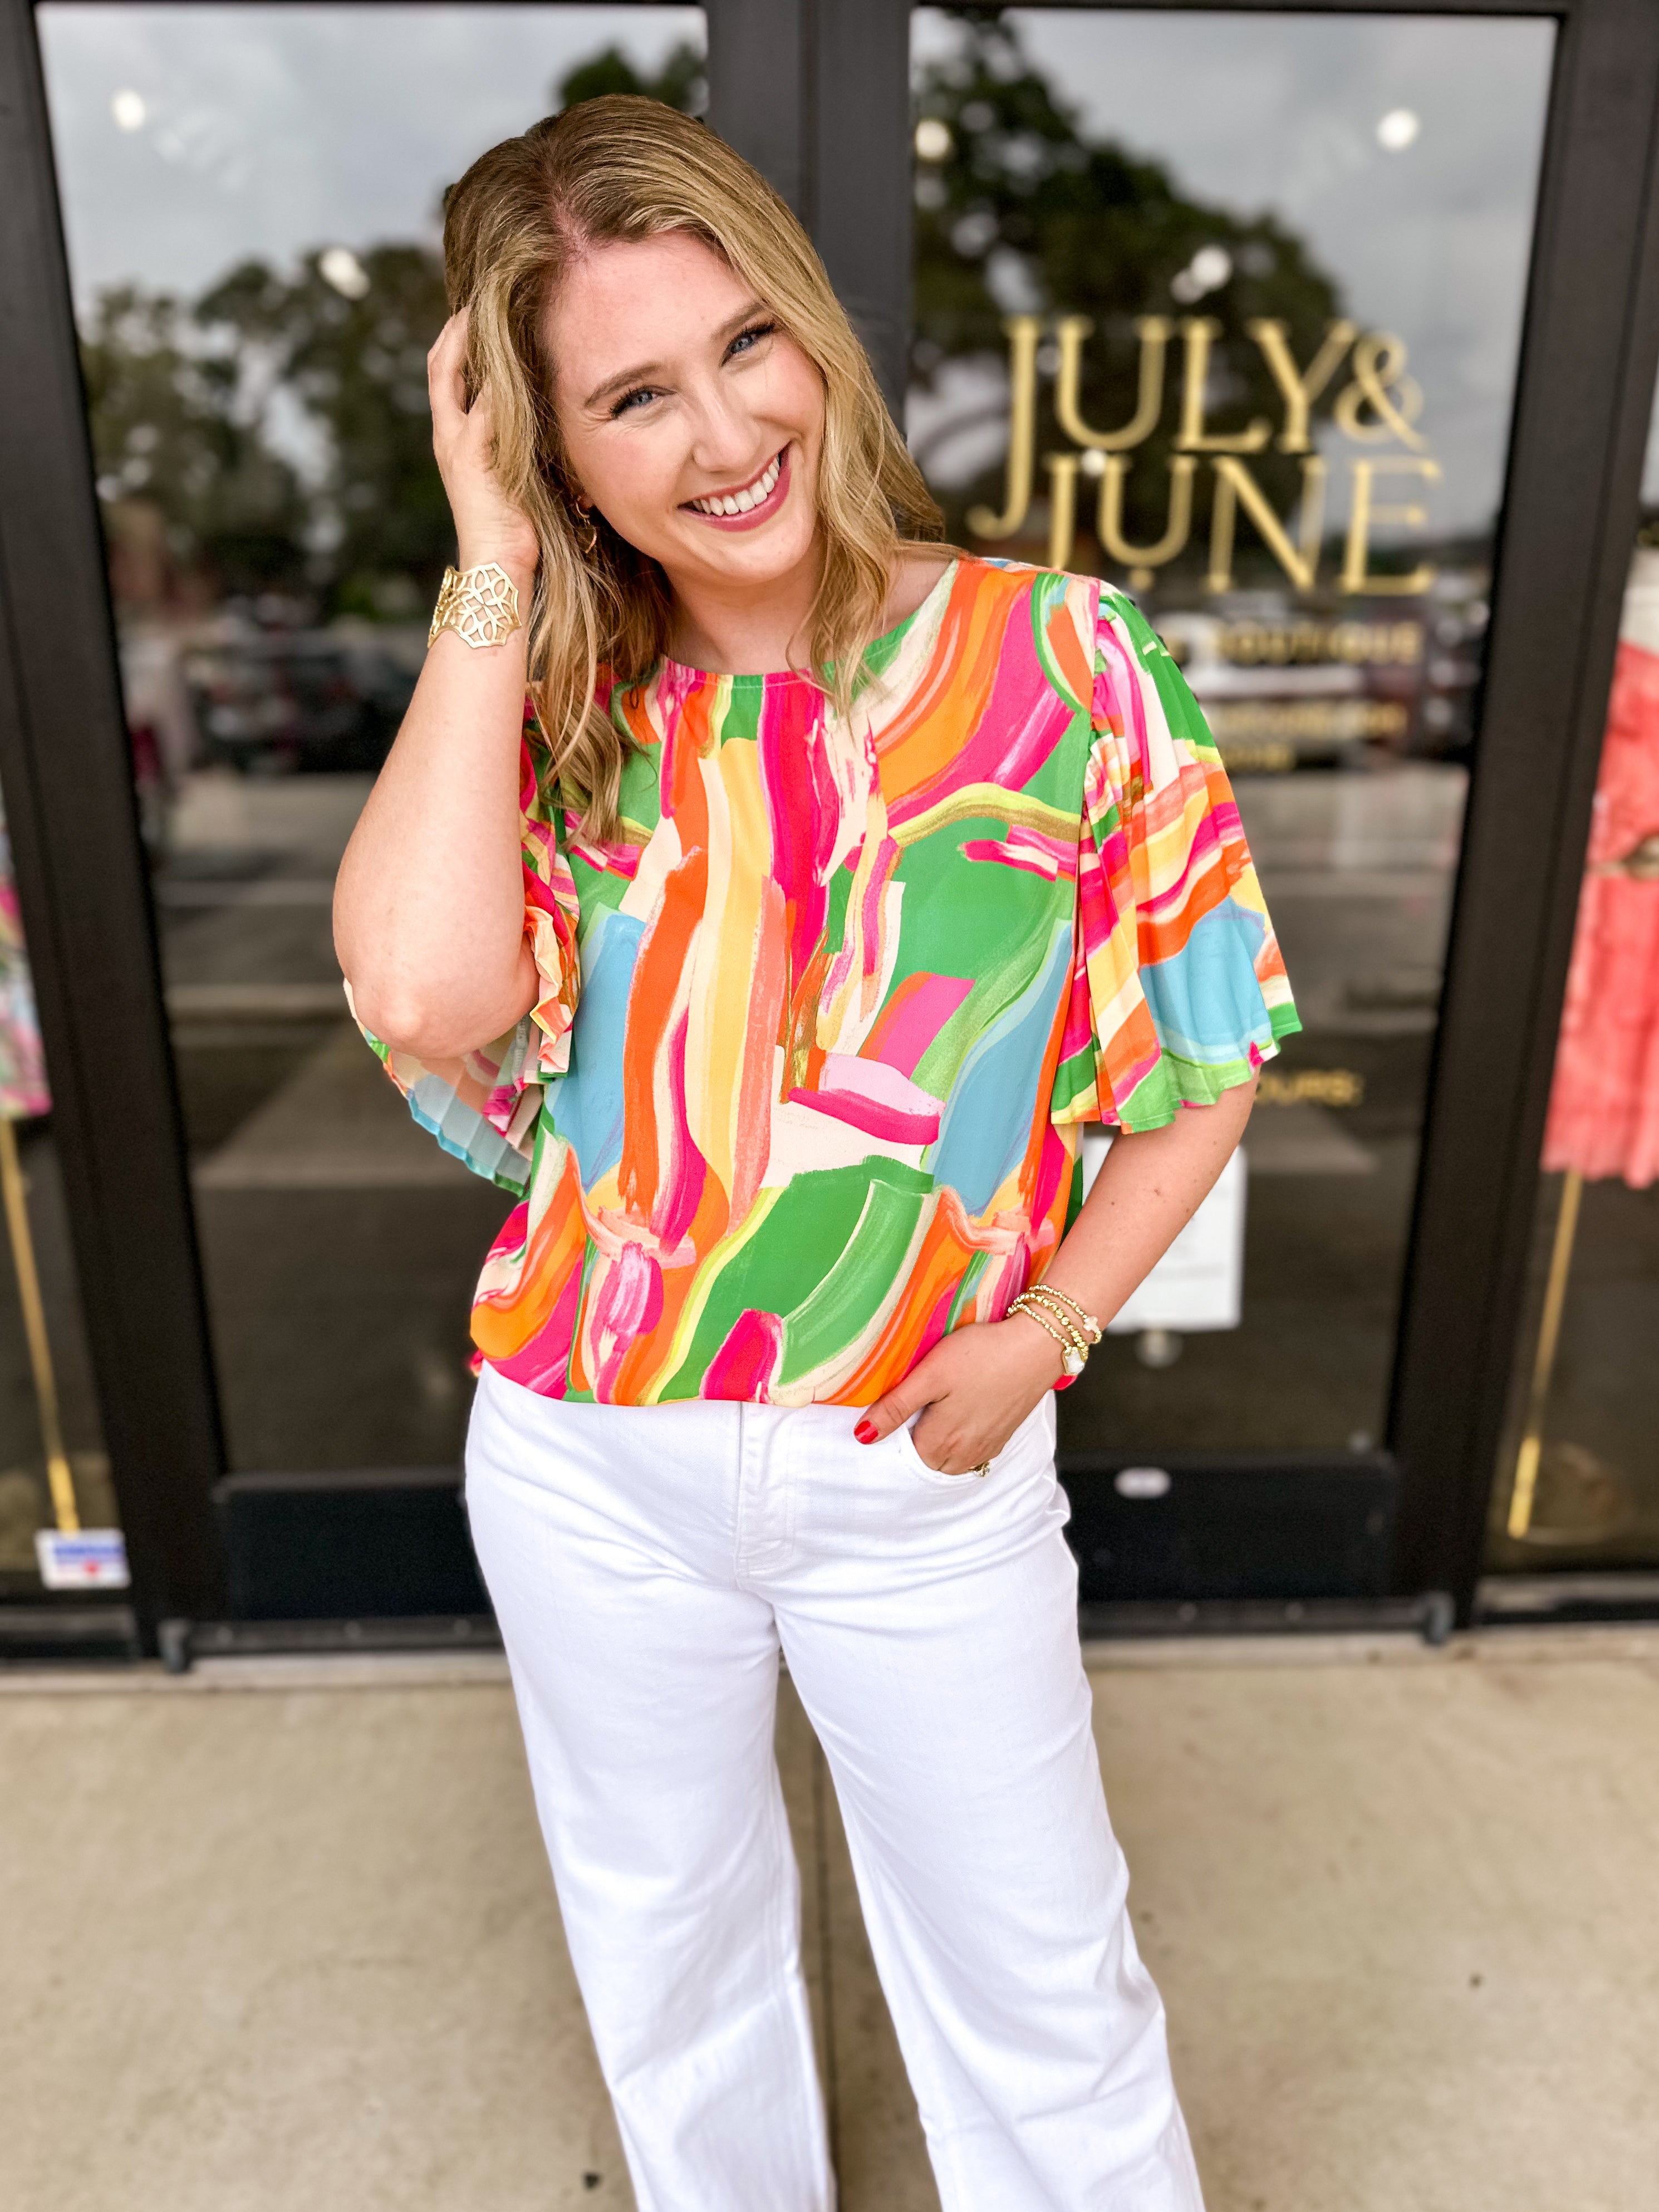 Bold Watercolor Blouse-200 Fashion Blouses-FLYING TOMATO-July & June Women's Fashion Boutique Located in San Antonio, Texas